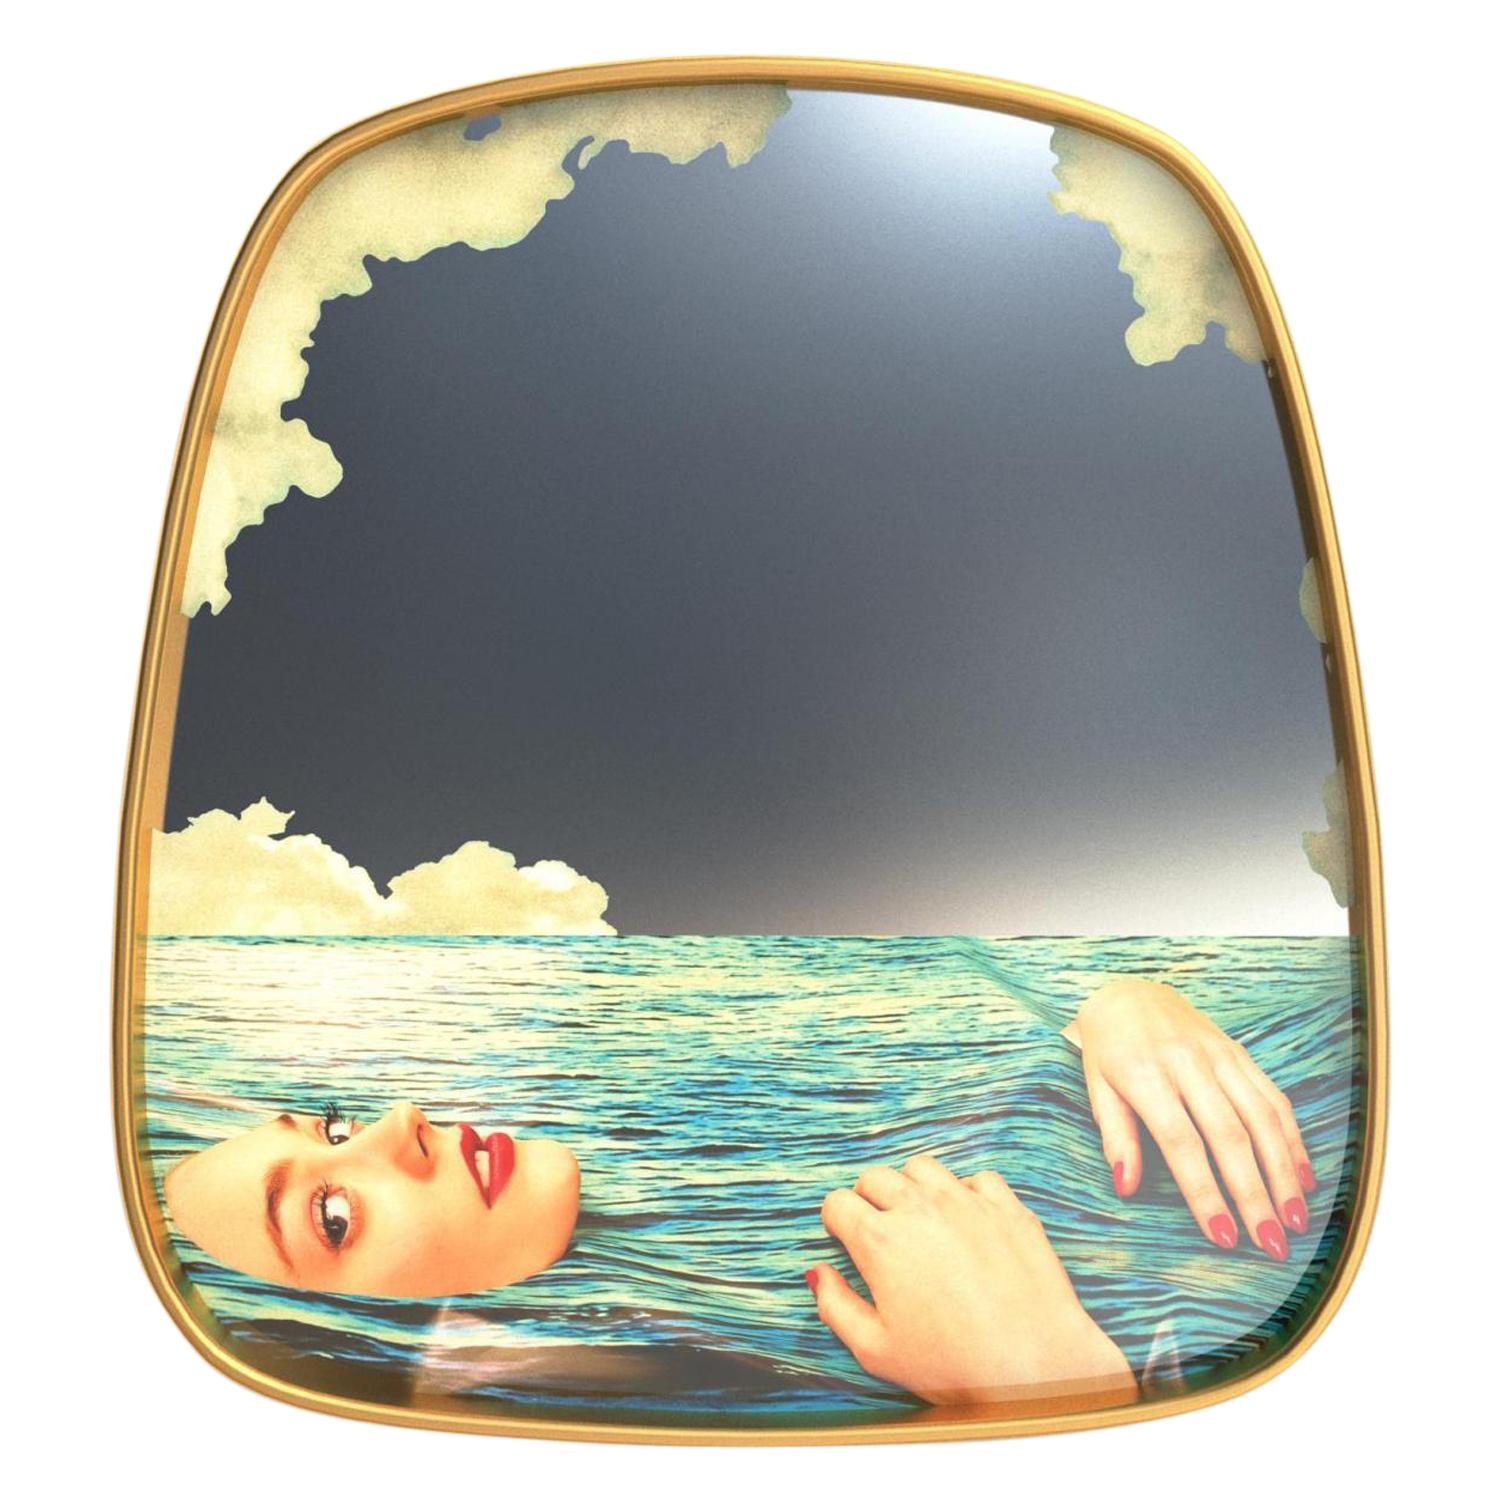 Seletti "Sea Girl" Wall Mirror with Gold Frame by Toiletpaper